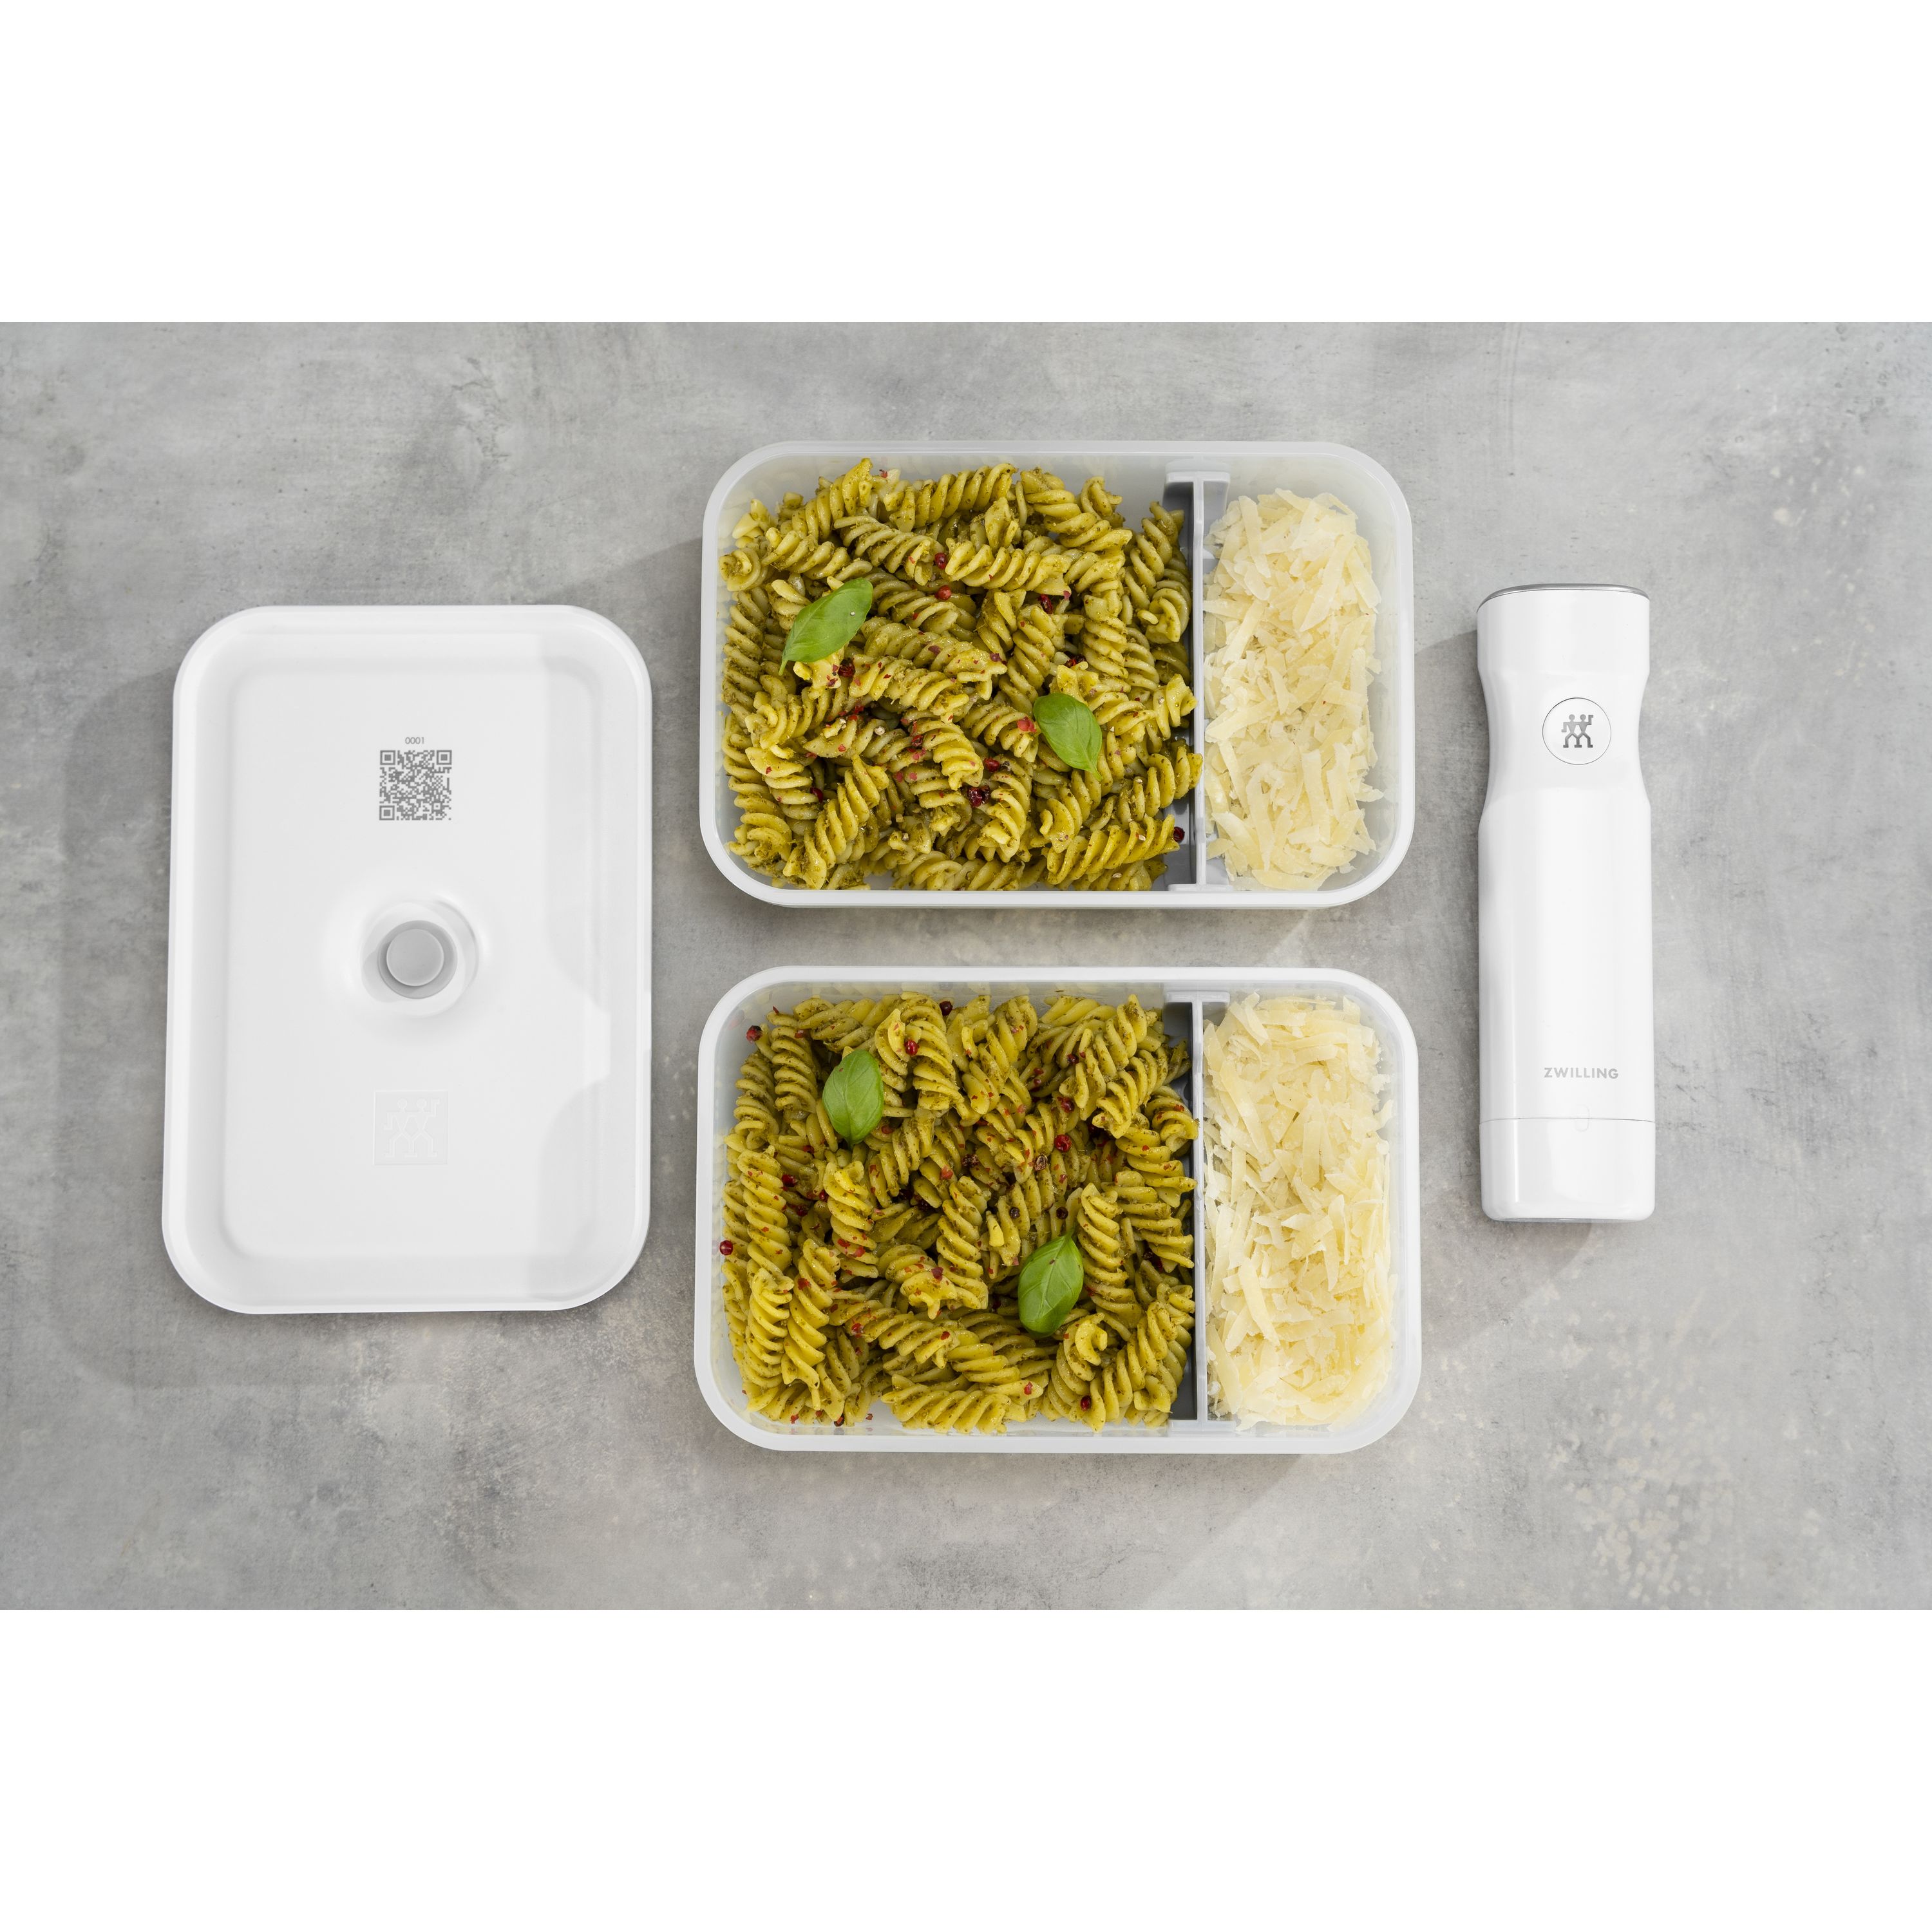 ZWILLING Large Fresh & Save Lunch Box + Reviews